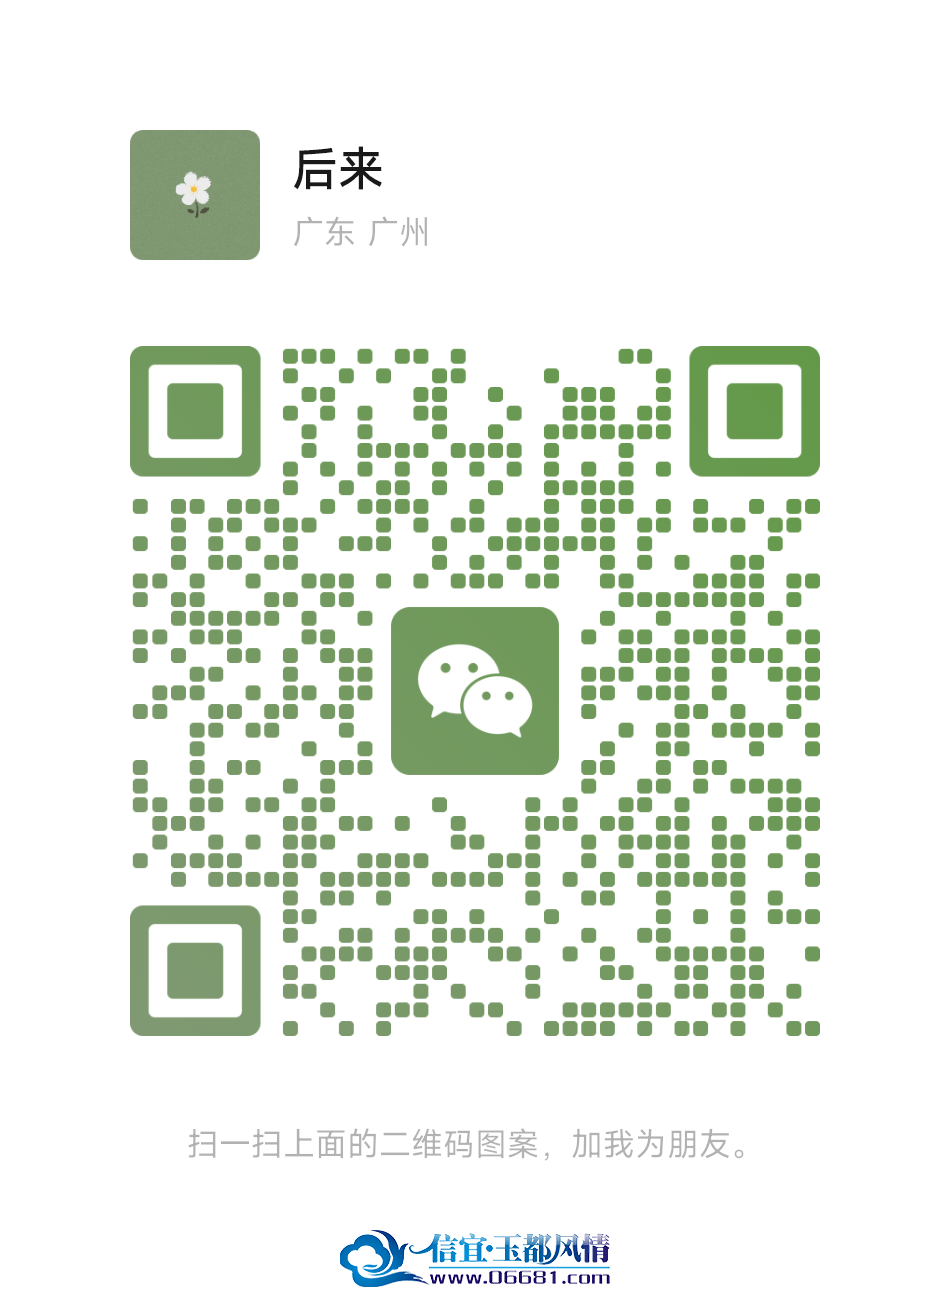 mmqrcode1690595315015.png